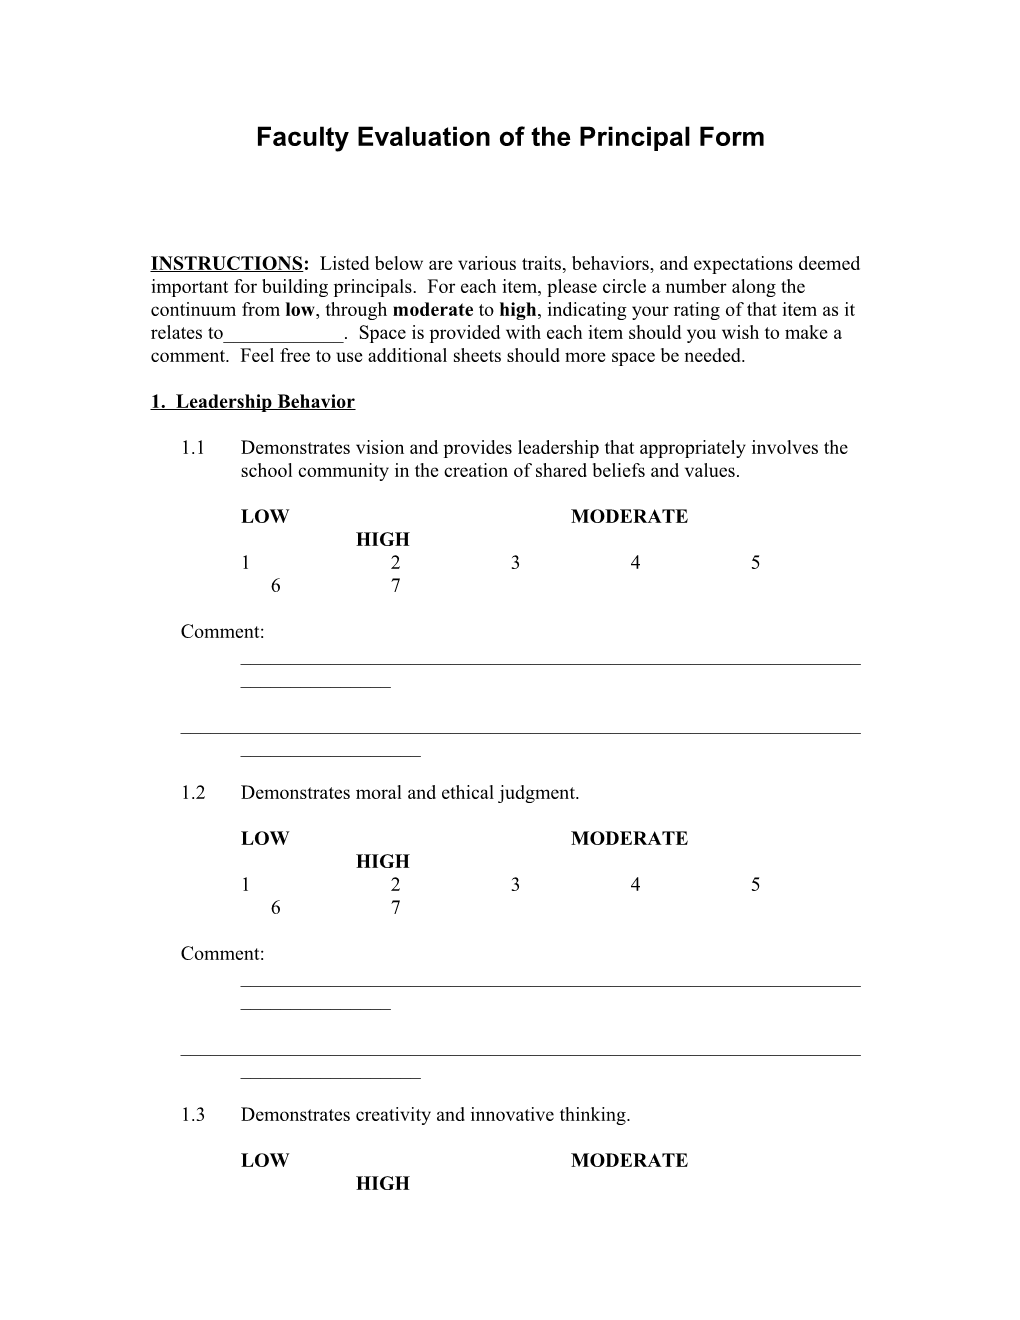 Faculty Evaluation of the Principal Form